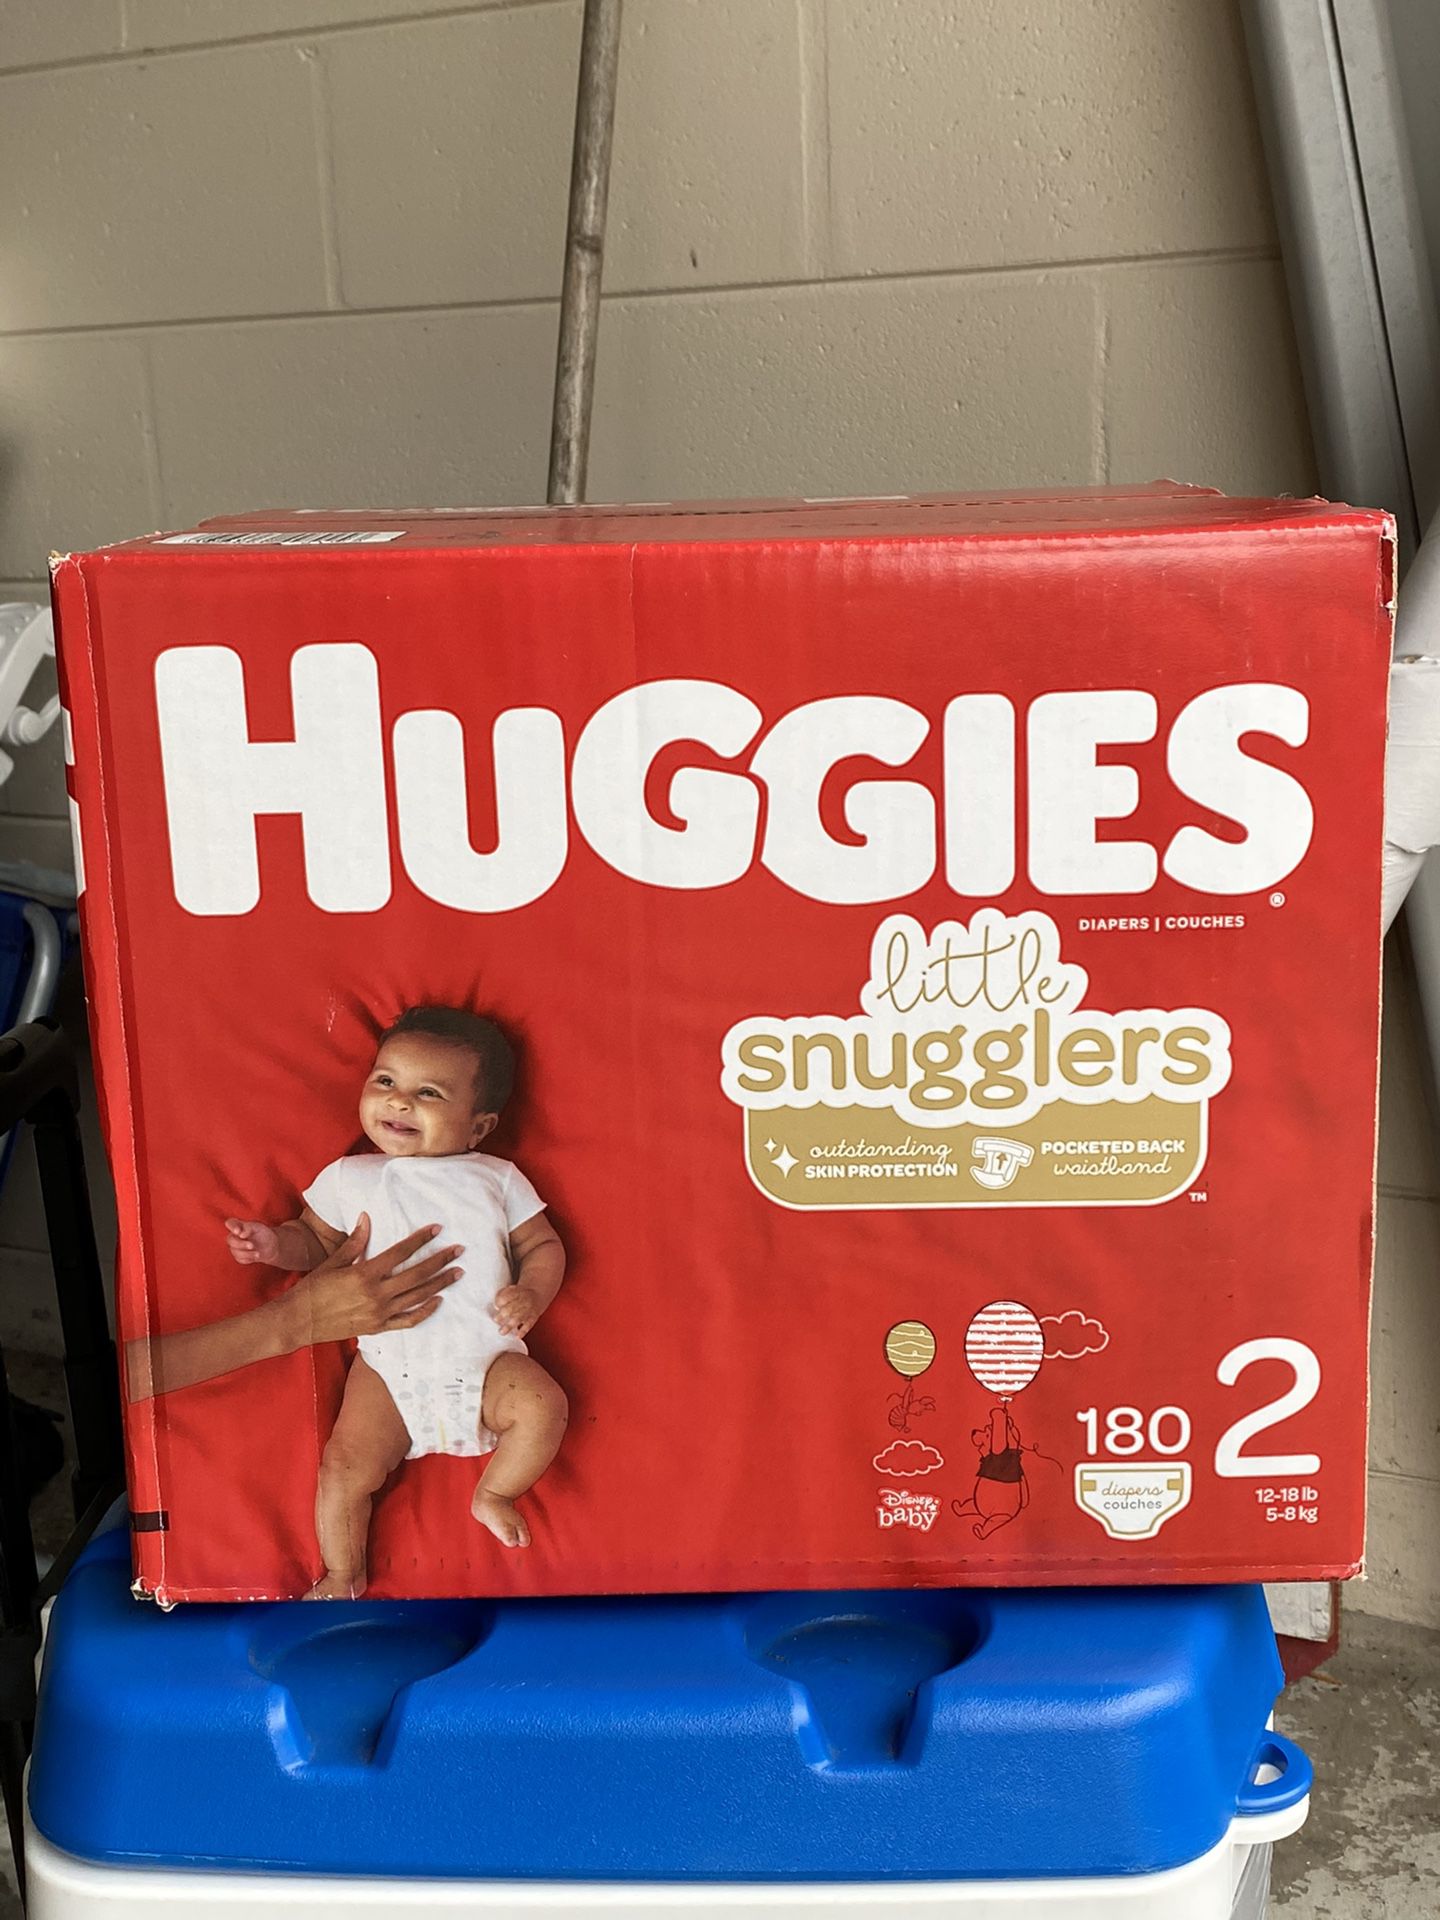 NEW/ NEVER OPENED Huggies Diapers - size 2